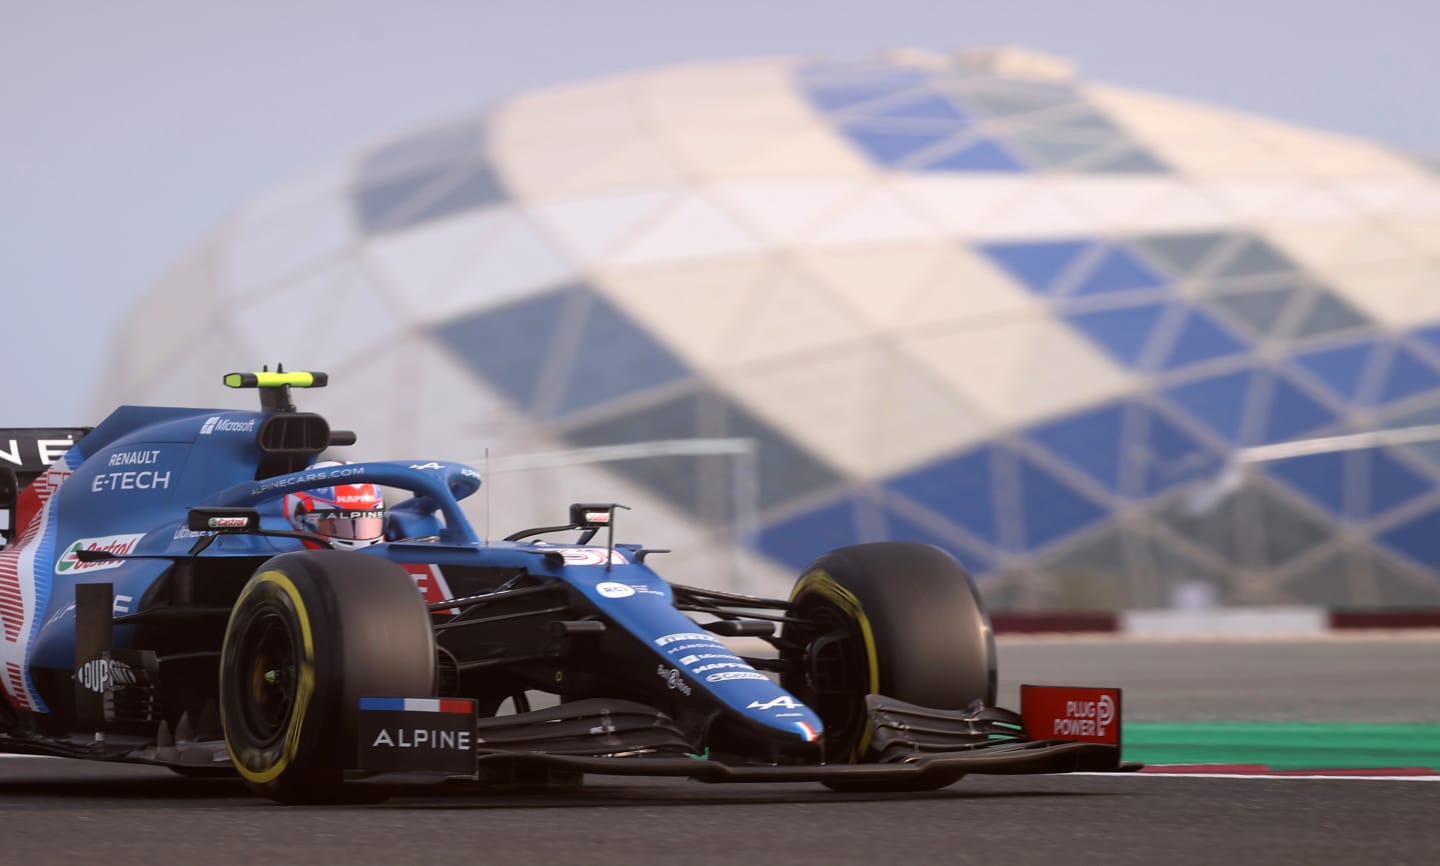 DOHA, QATAR - NOVEMBER 19: Esteban Ocon of France driving the (31) Alpine A521 Renault during practice ahead of the F1 Grand Prix of Qatar at Losail International Circuit on November 19, 2021 in Doha, Qatar. (Photo by Lars Baron/Getty Images)